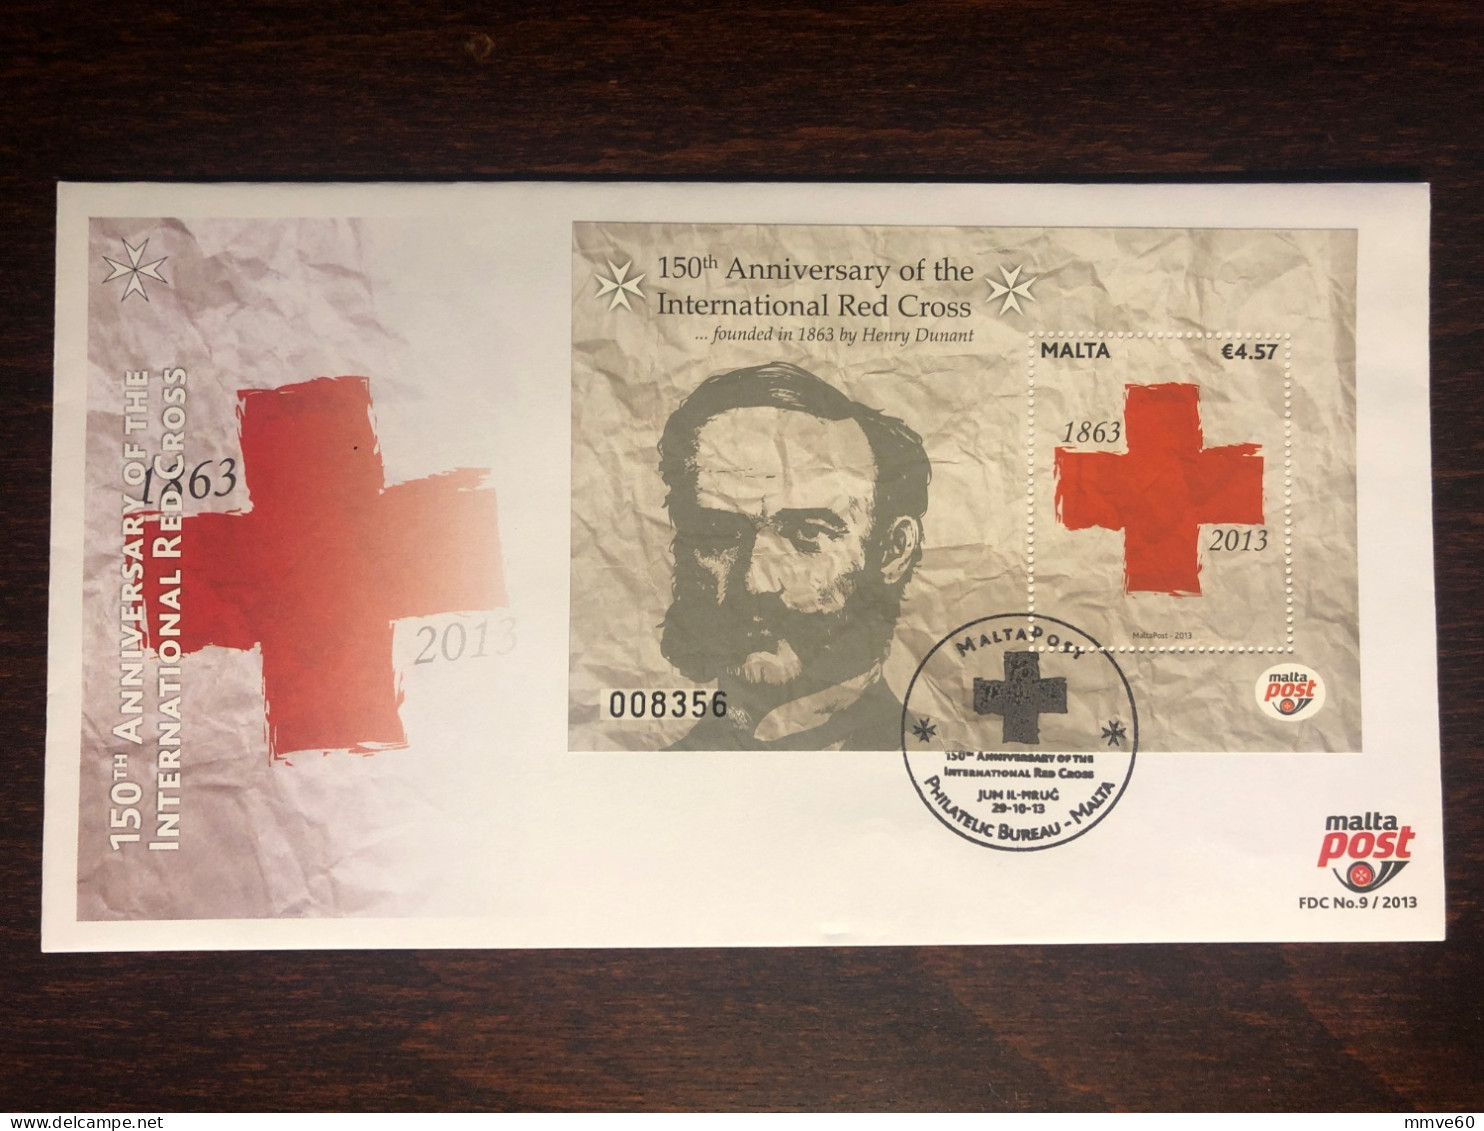 MALTA FDC COVER 2013 YEAR RED CROSS DUNANT HEALTH MEDICINE STAMPS - Malte